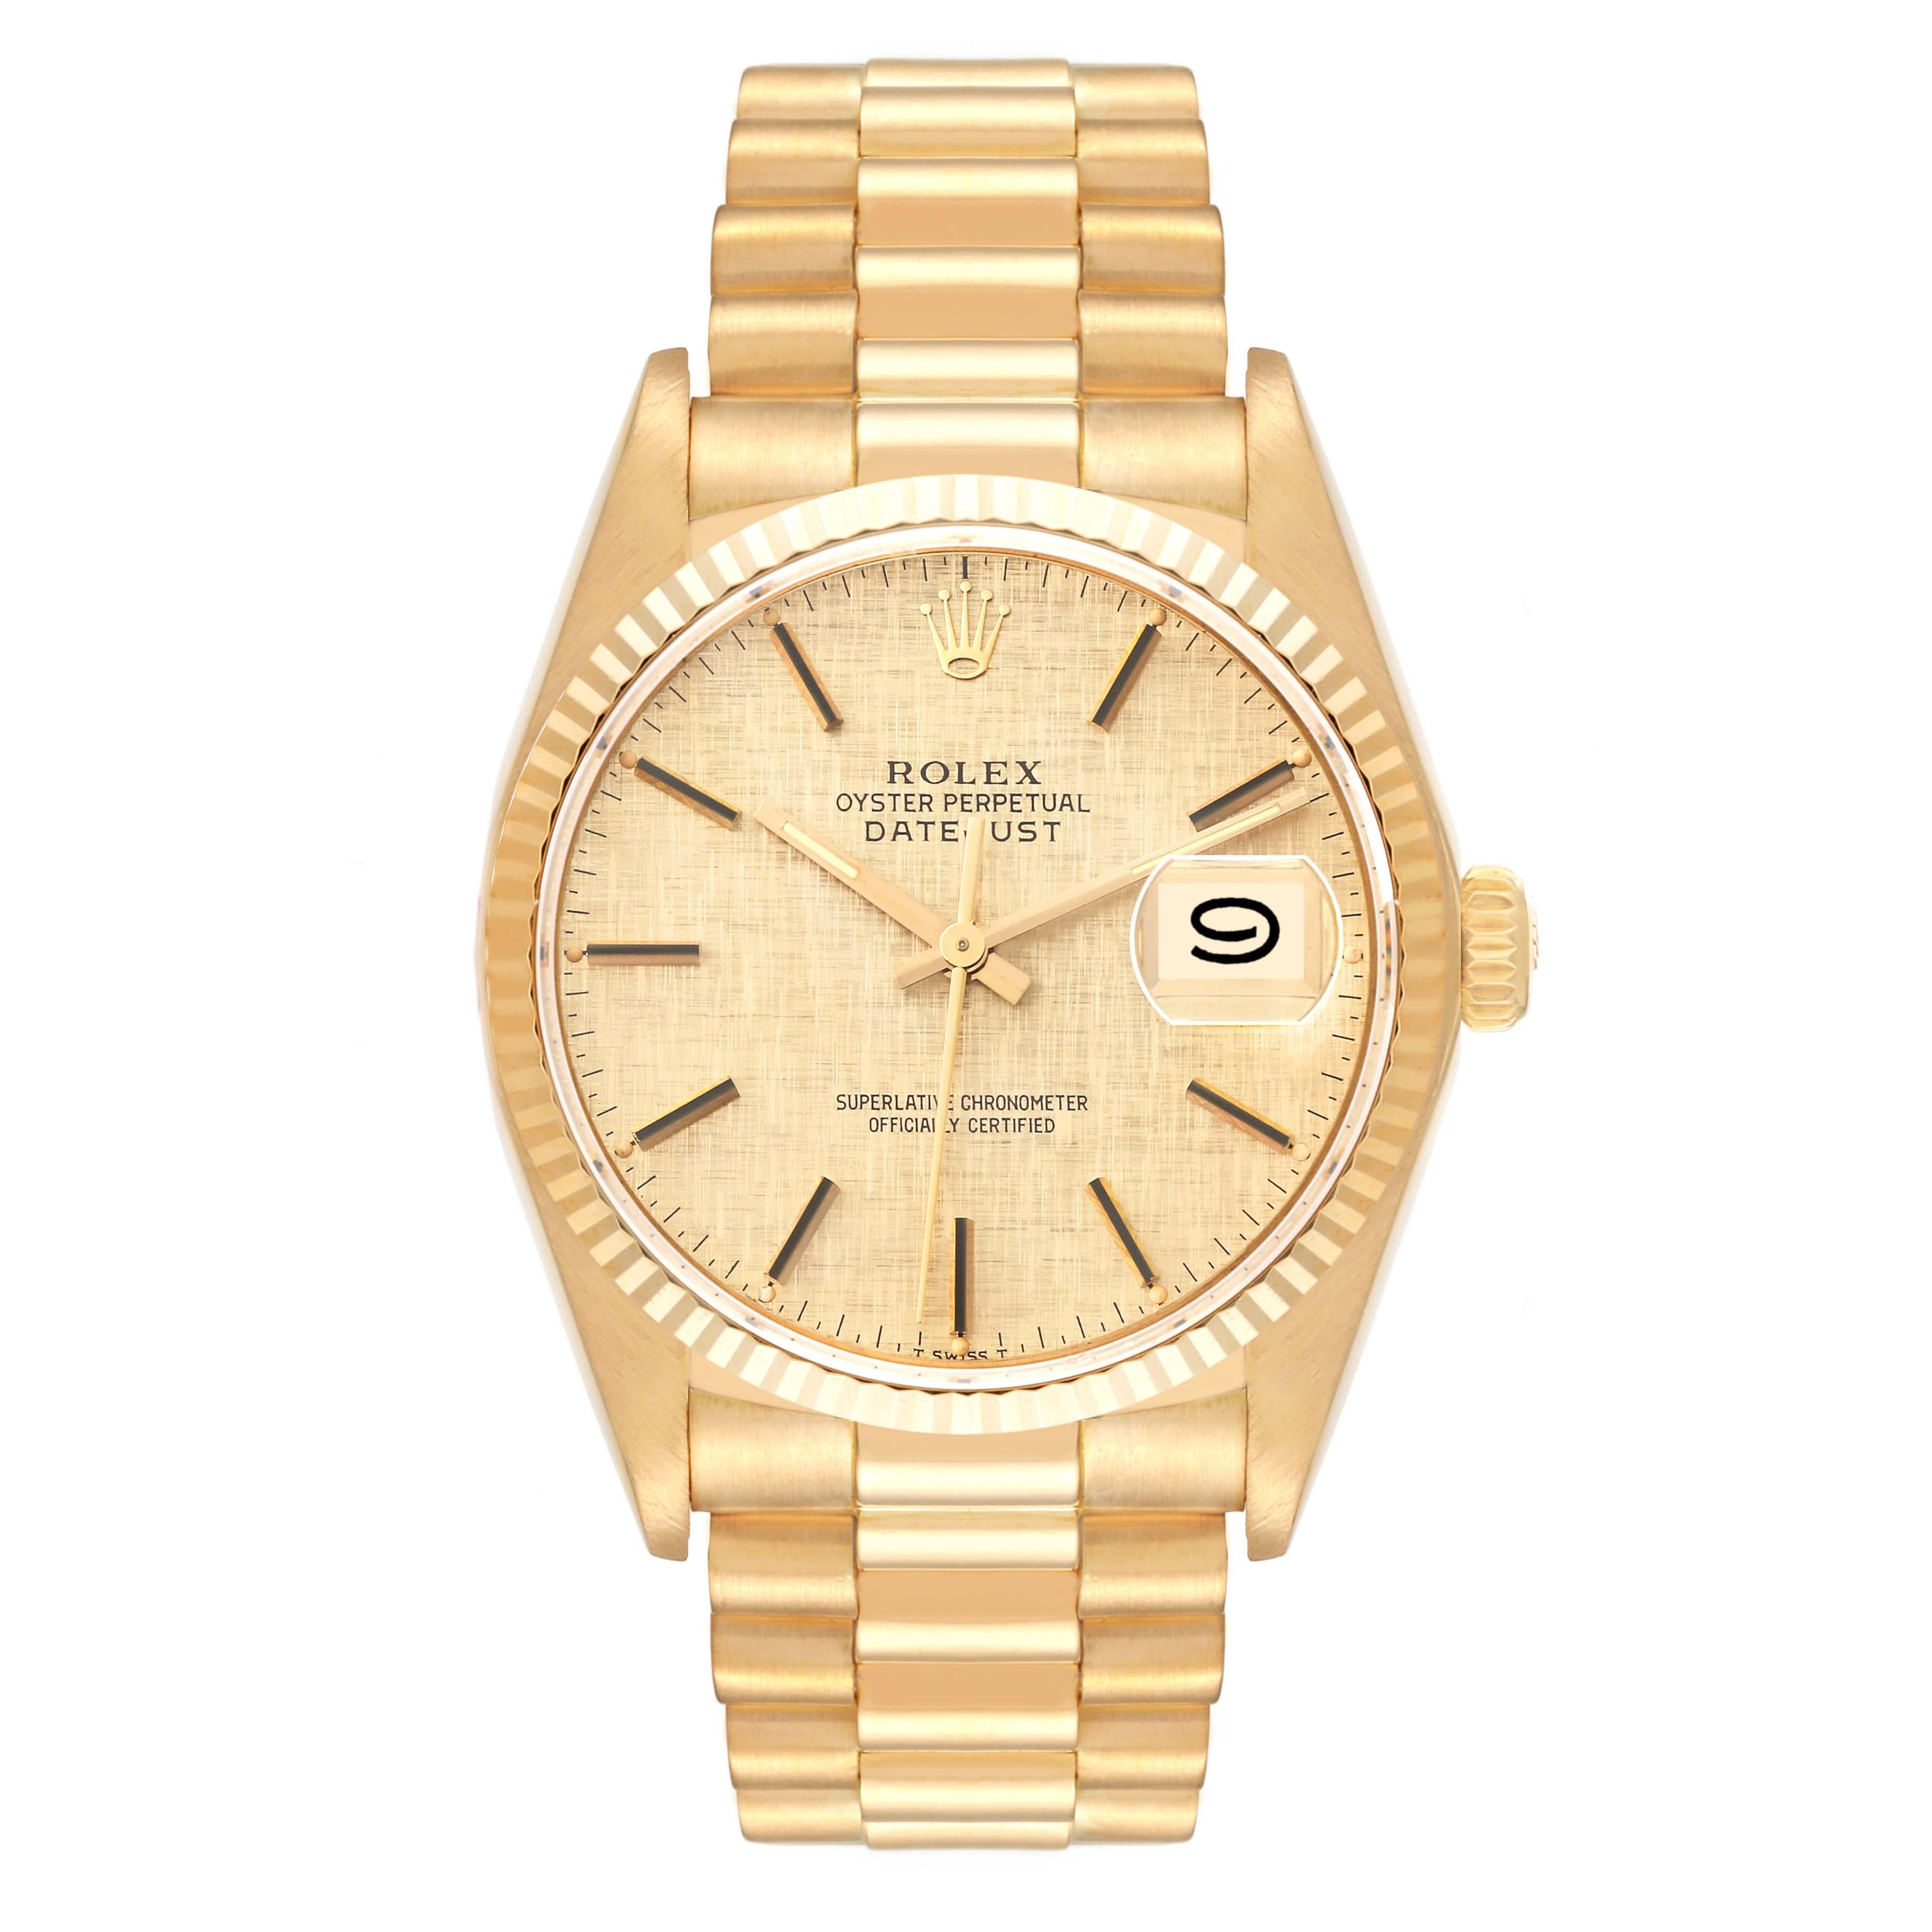 Rolex Datejust Yellow Gold Linen Dial Vintage Mens Watch 16018. Officially certified chronometer self-winding movement. 18k yellow gold case 36.0 mm in diameter. Rolex logo on a crown. 18k yellow gold fluted bezel. Scratch resistant sapphire crystal